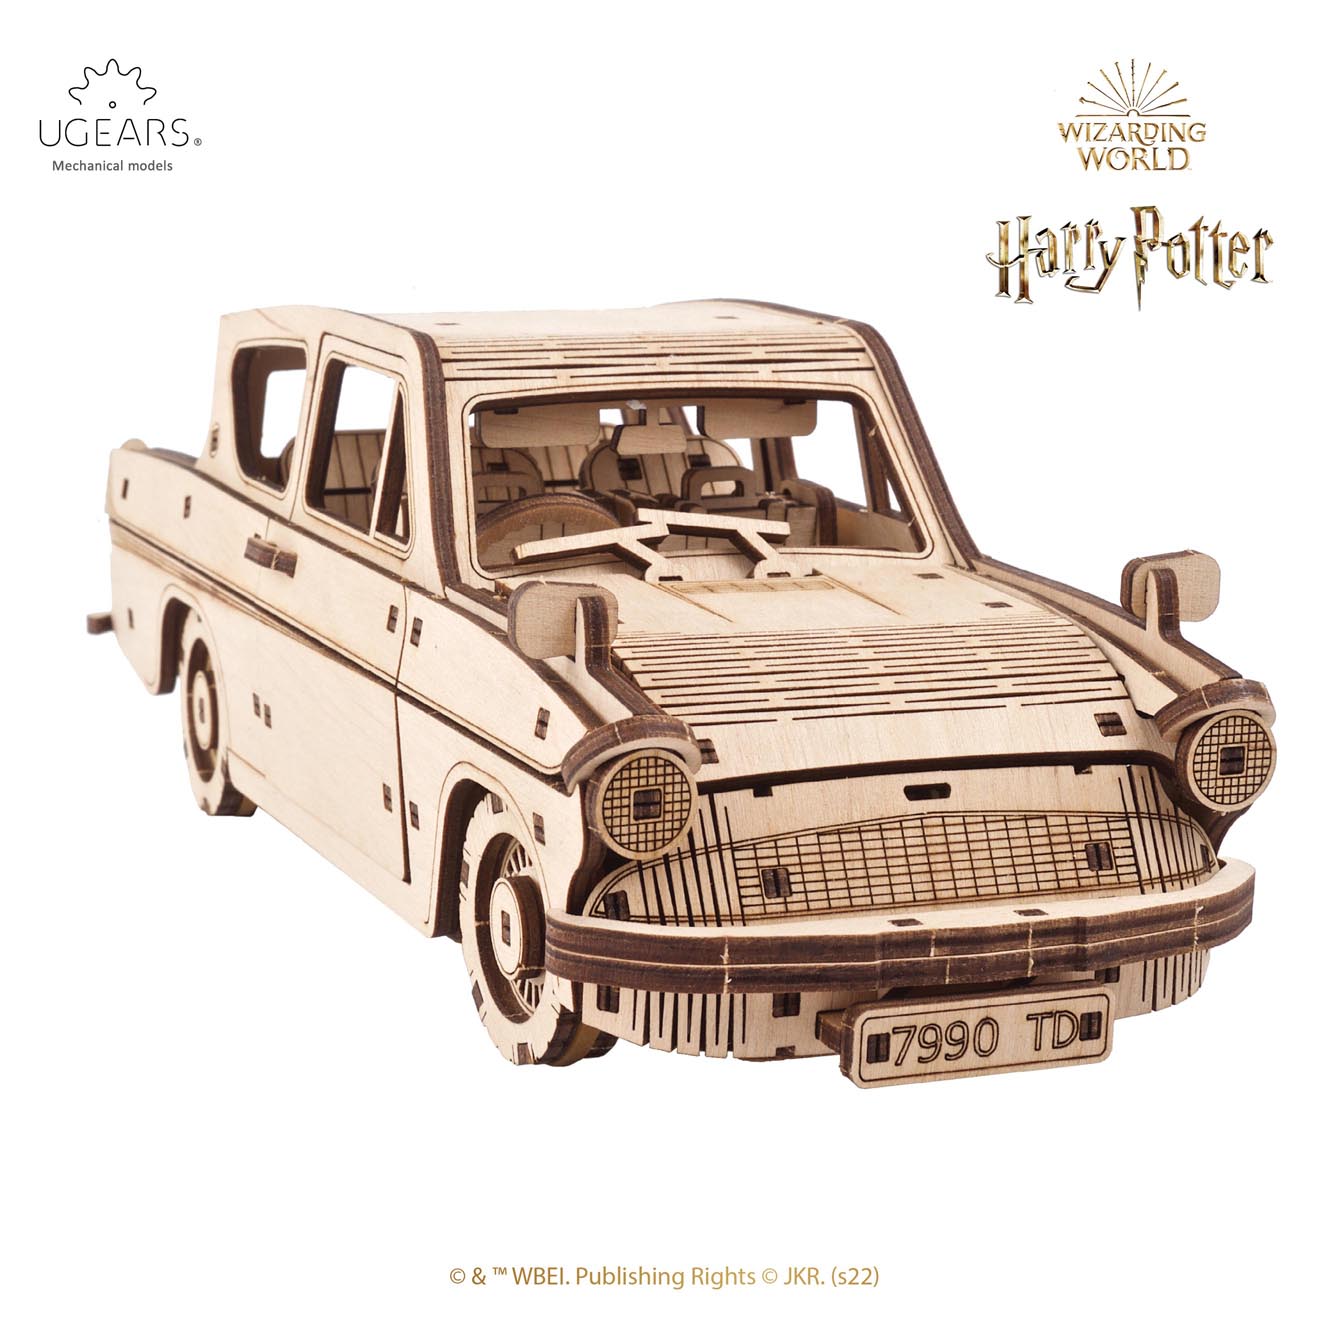 harry potter flying car toy